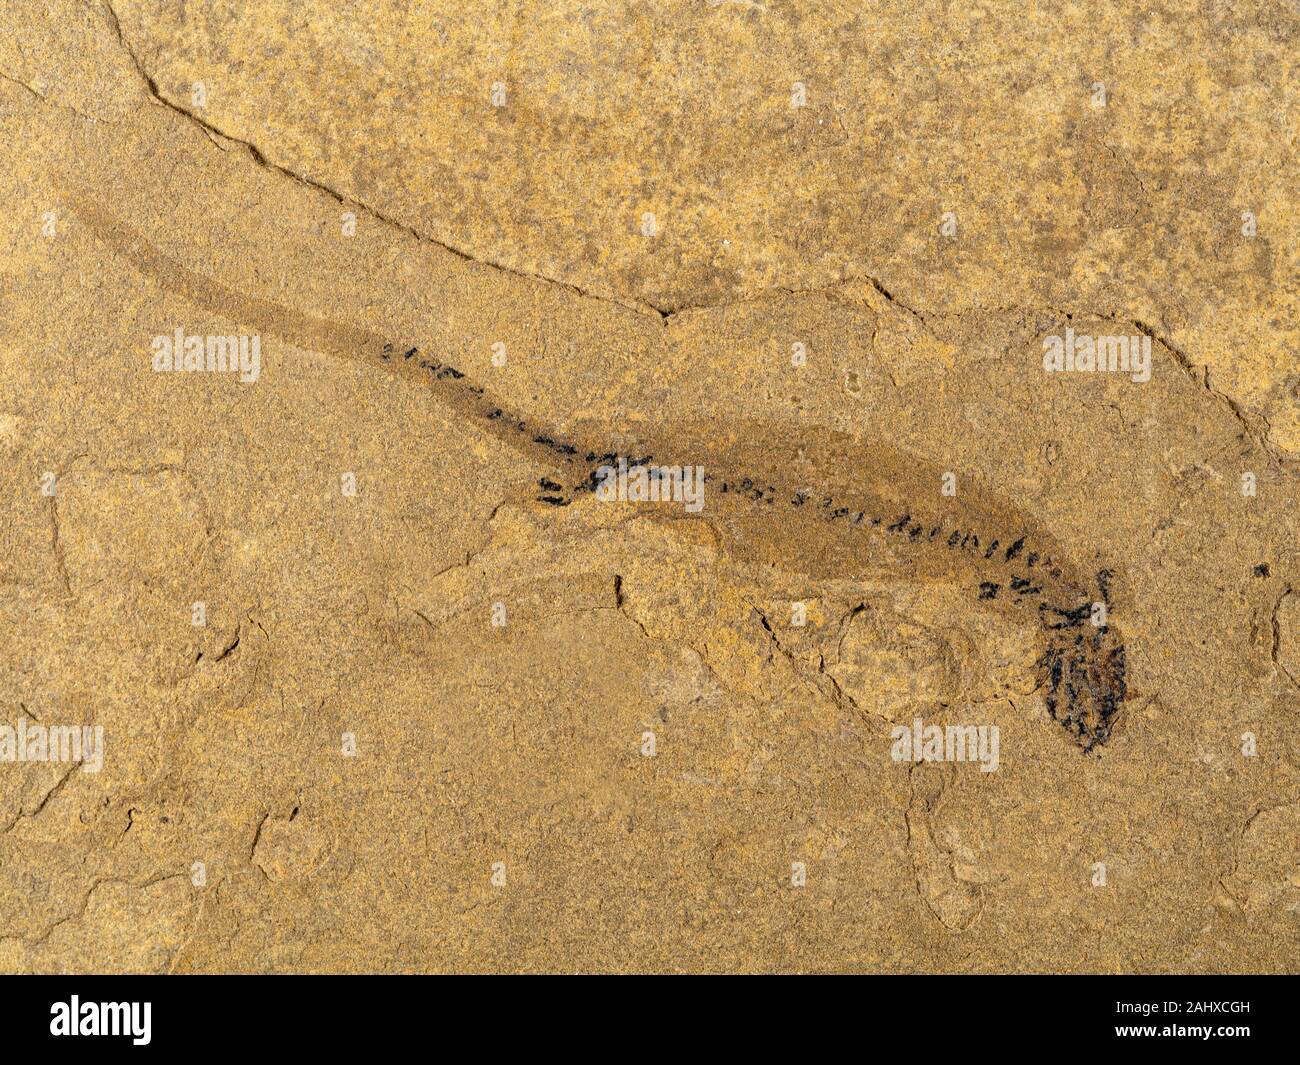 Fossil amphibian, Apateon species These extinct aquatic salamander-like animals lived in ponds and lakes 295 to 290 million years ago in what is now G Stock Photo